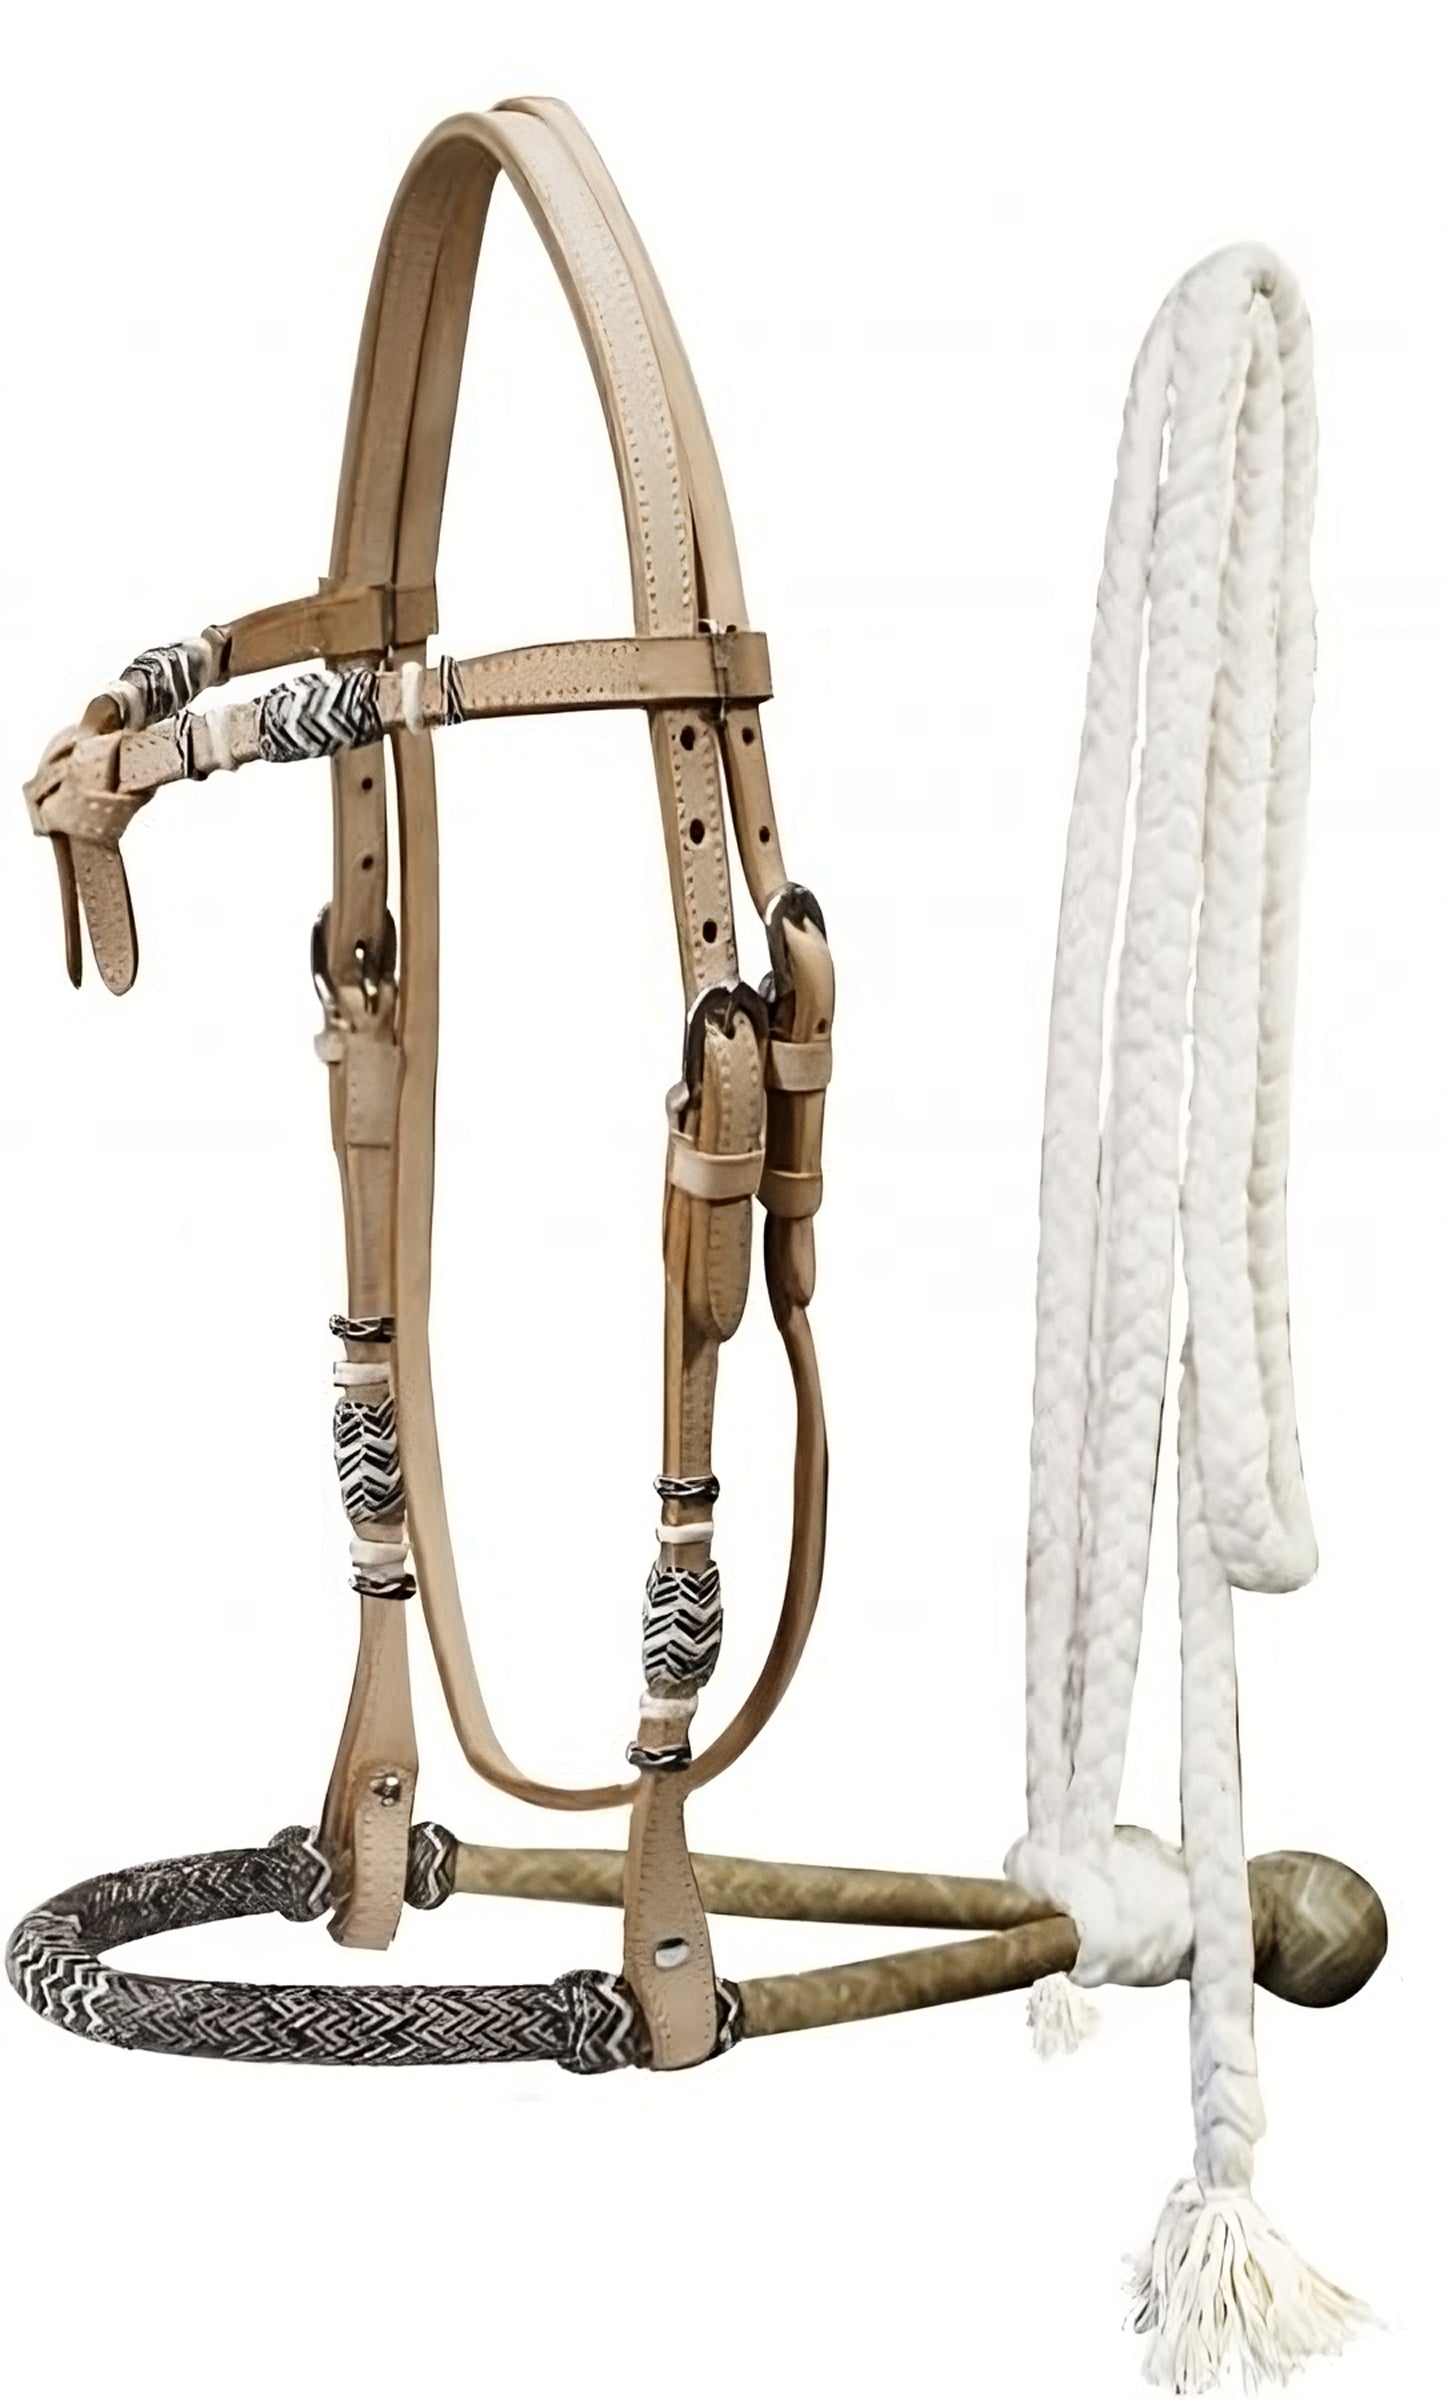 3311: Showman™ Fine quality rawhide core show bosal with a cotton mecate rein Headstall Showman